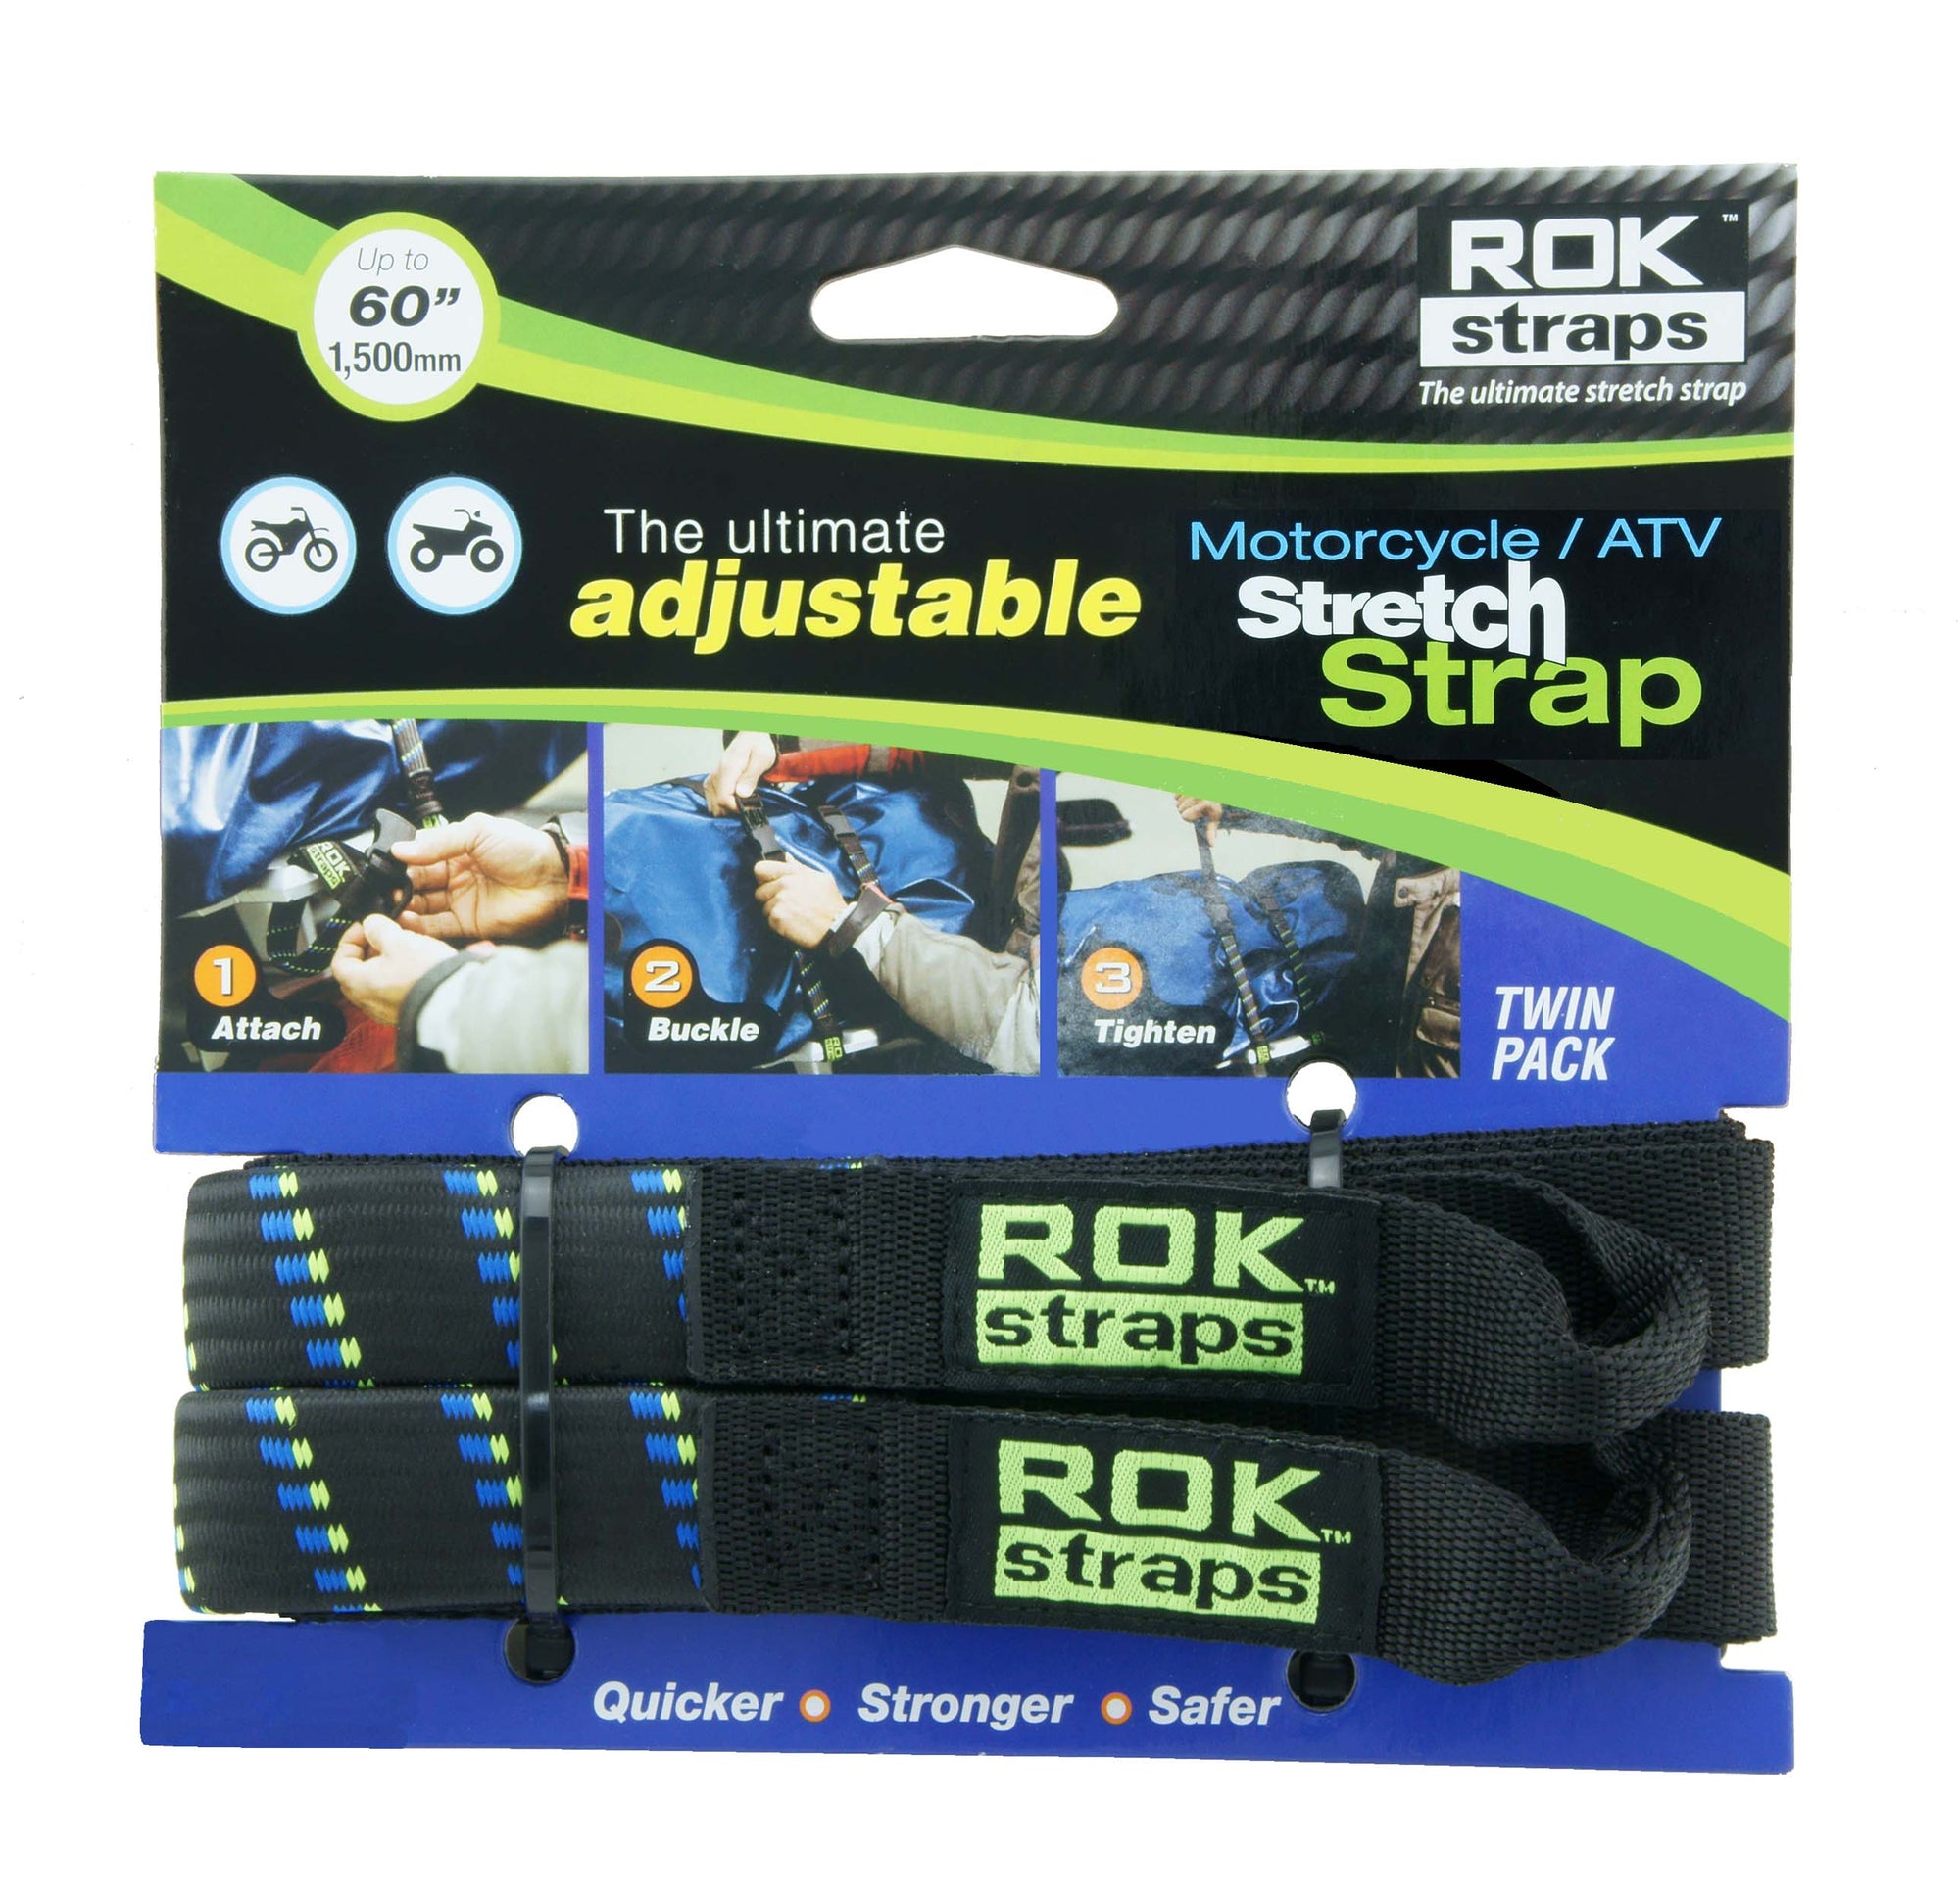 The ultimate adjustable pack strap stretch strap for medium weight cargo. UV protected from sunlight